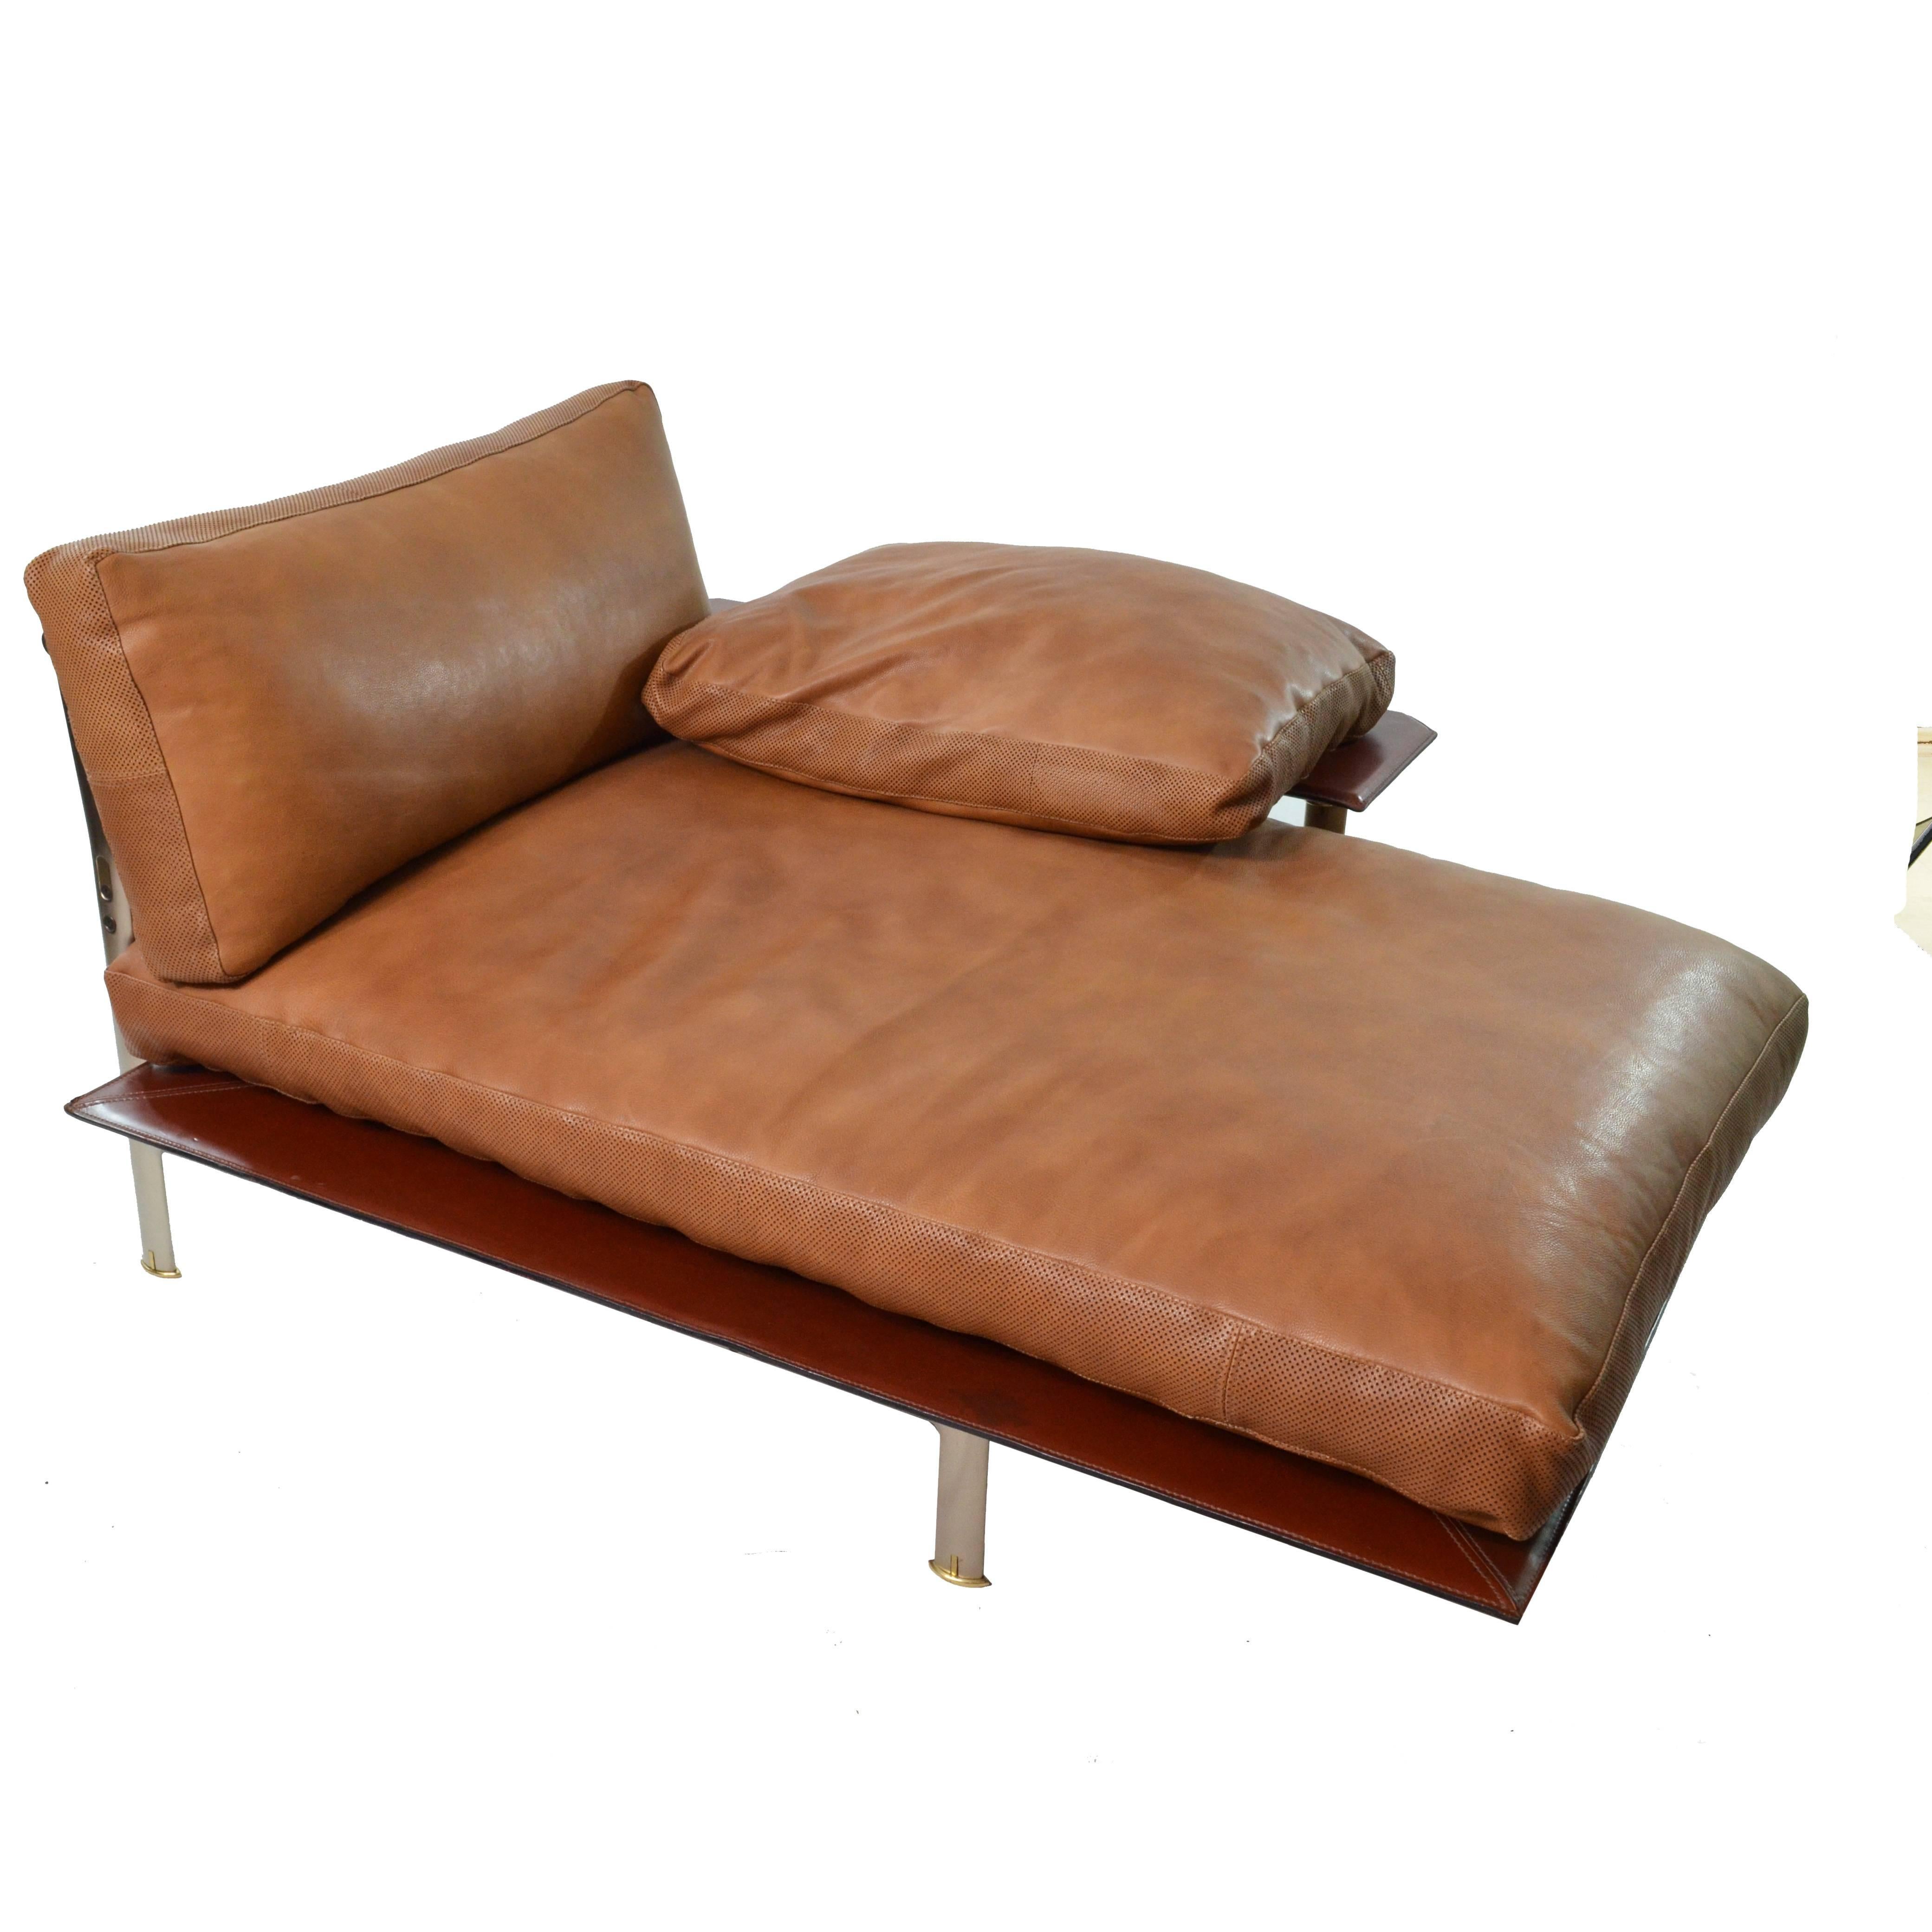 Modern 1970s Leather Italian Day Beds Citterio and Nava for B&B Italia